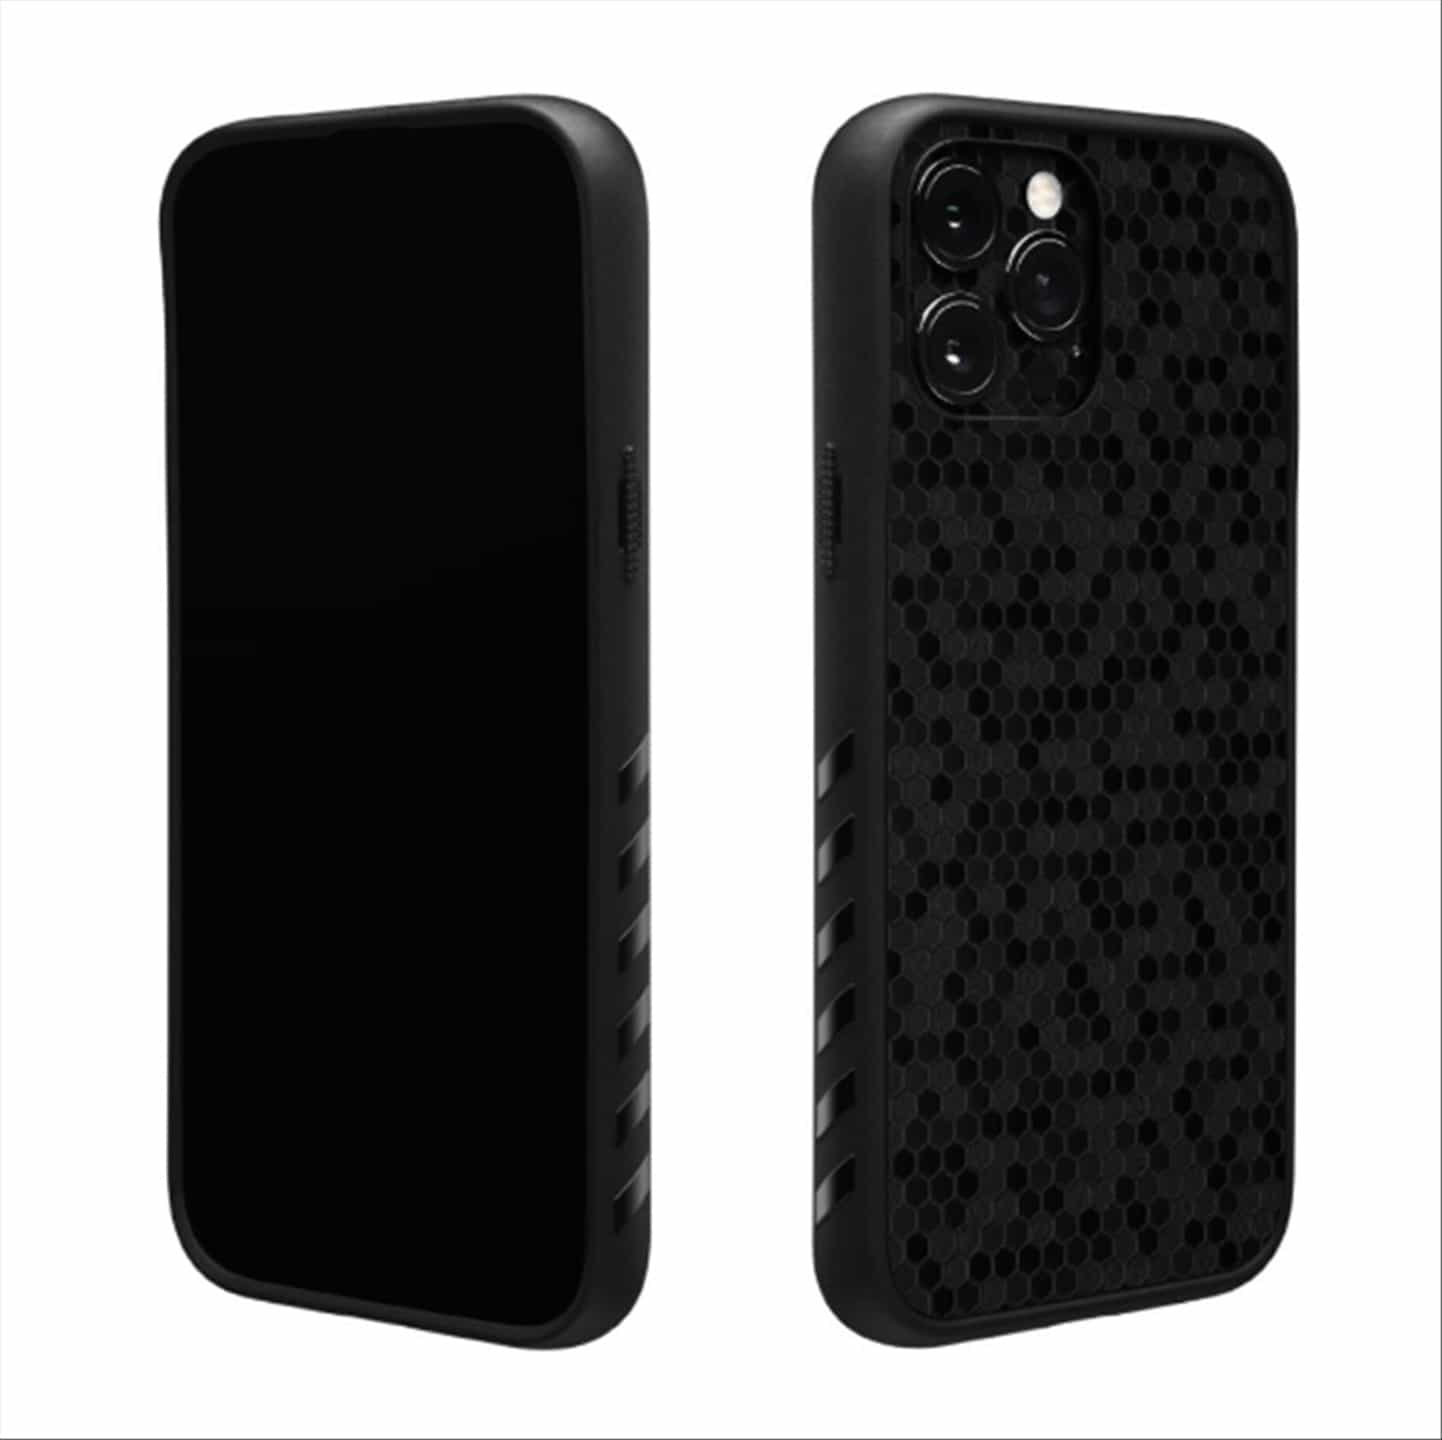 A walkthrough of different dbrand phone cases